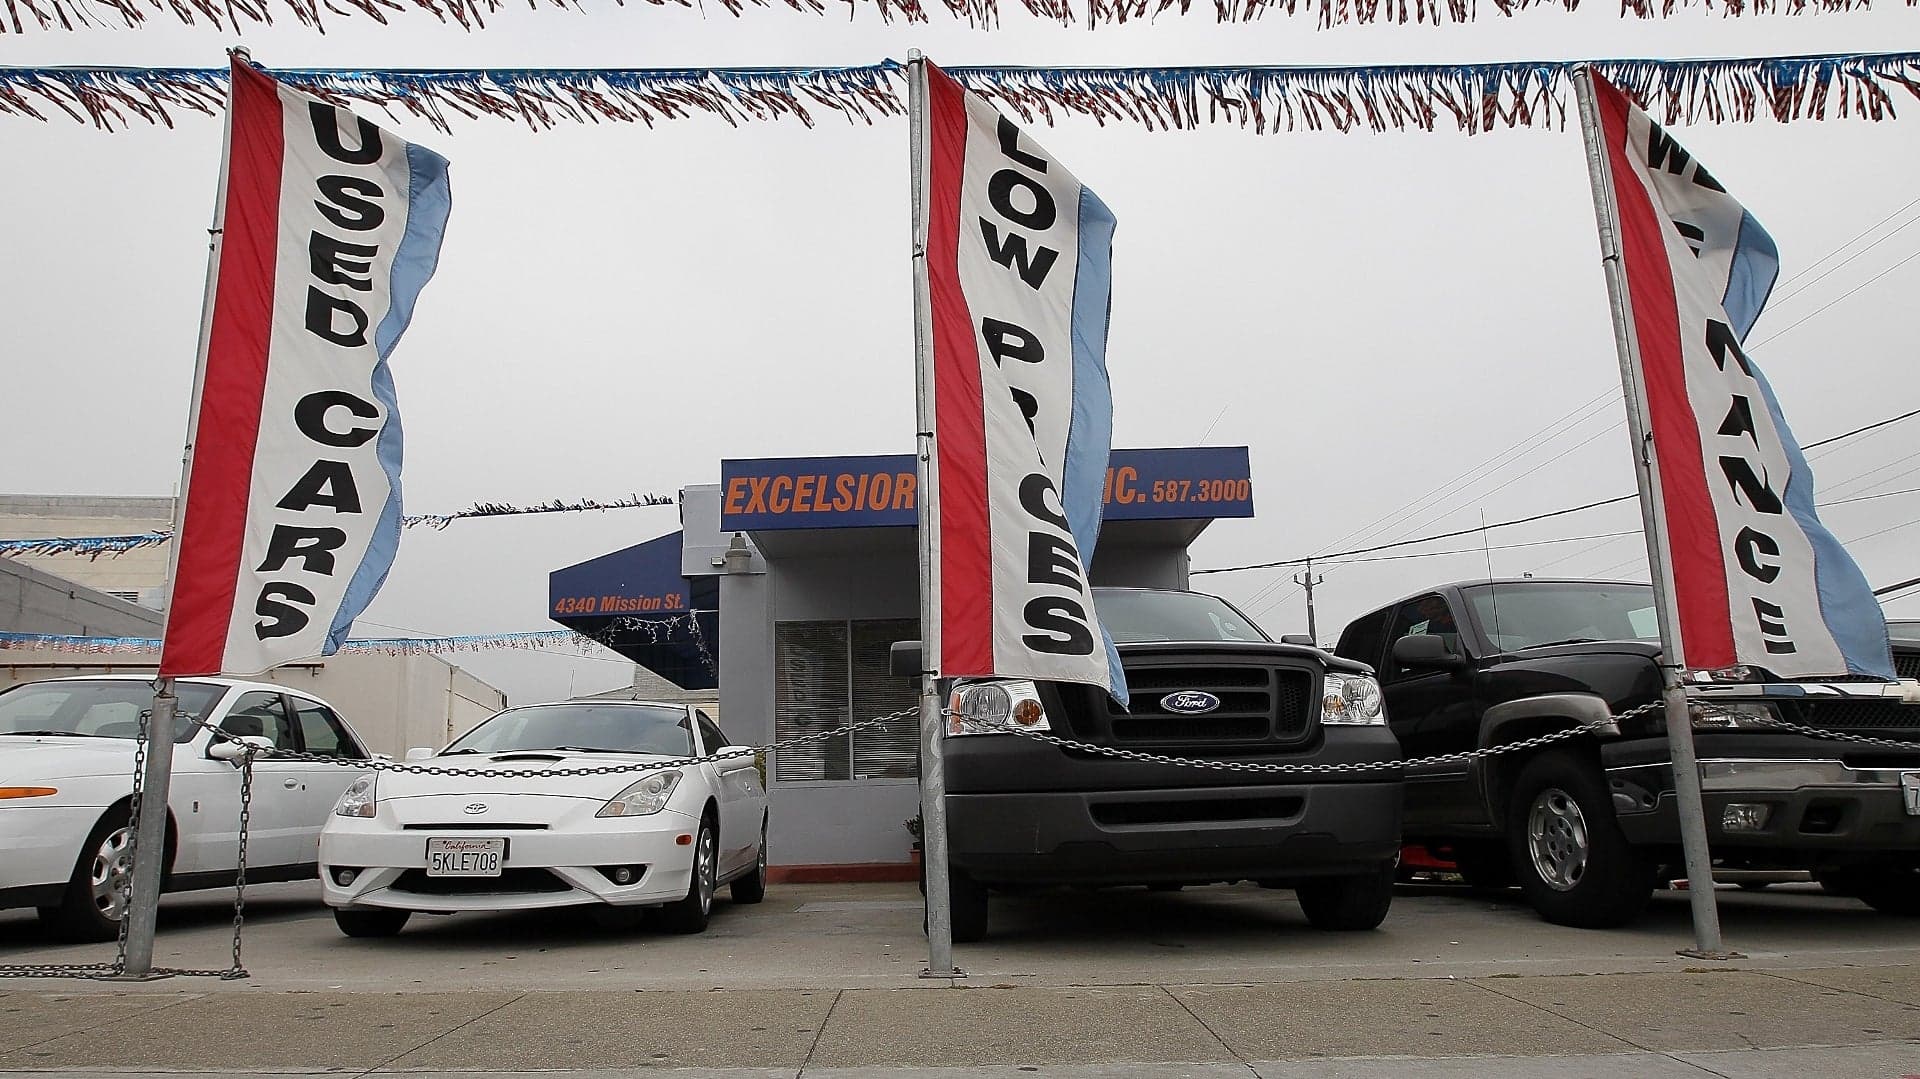 Used Car Values Are Plummeting Faster and Faster Across America, Report Claims